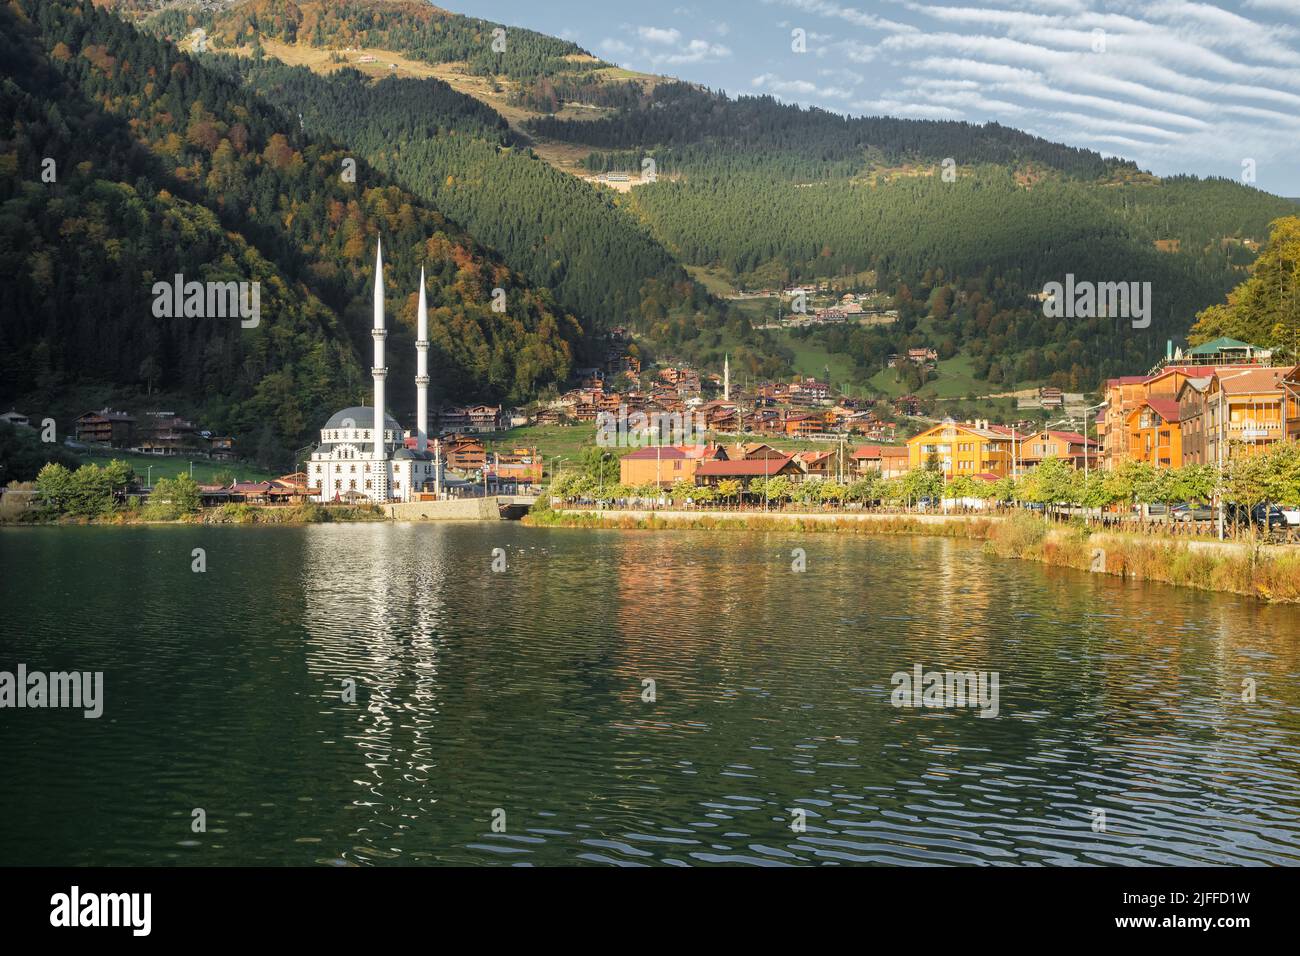 Autumn view of the Uzungol resort town in Trabzon province, Eastern Turkey Stock Photo